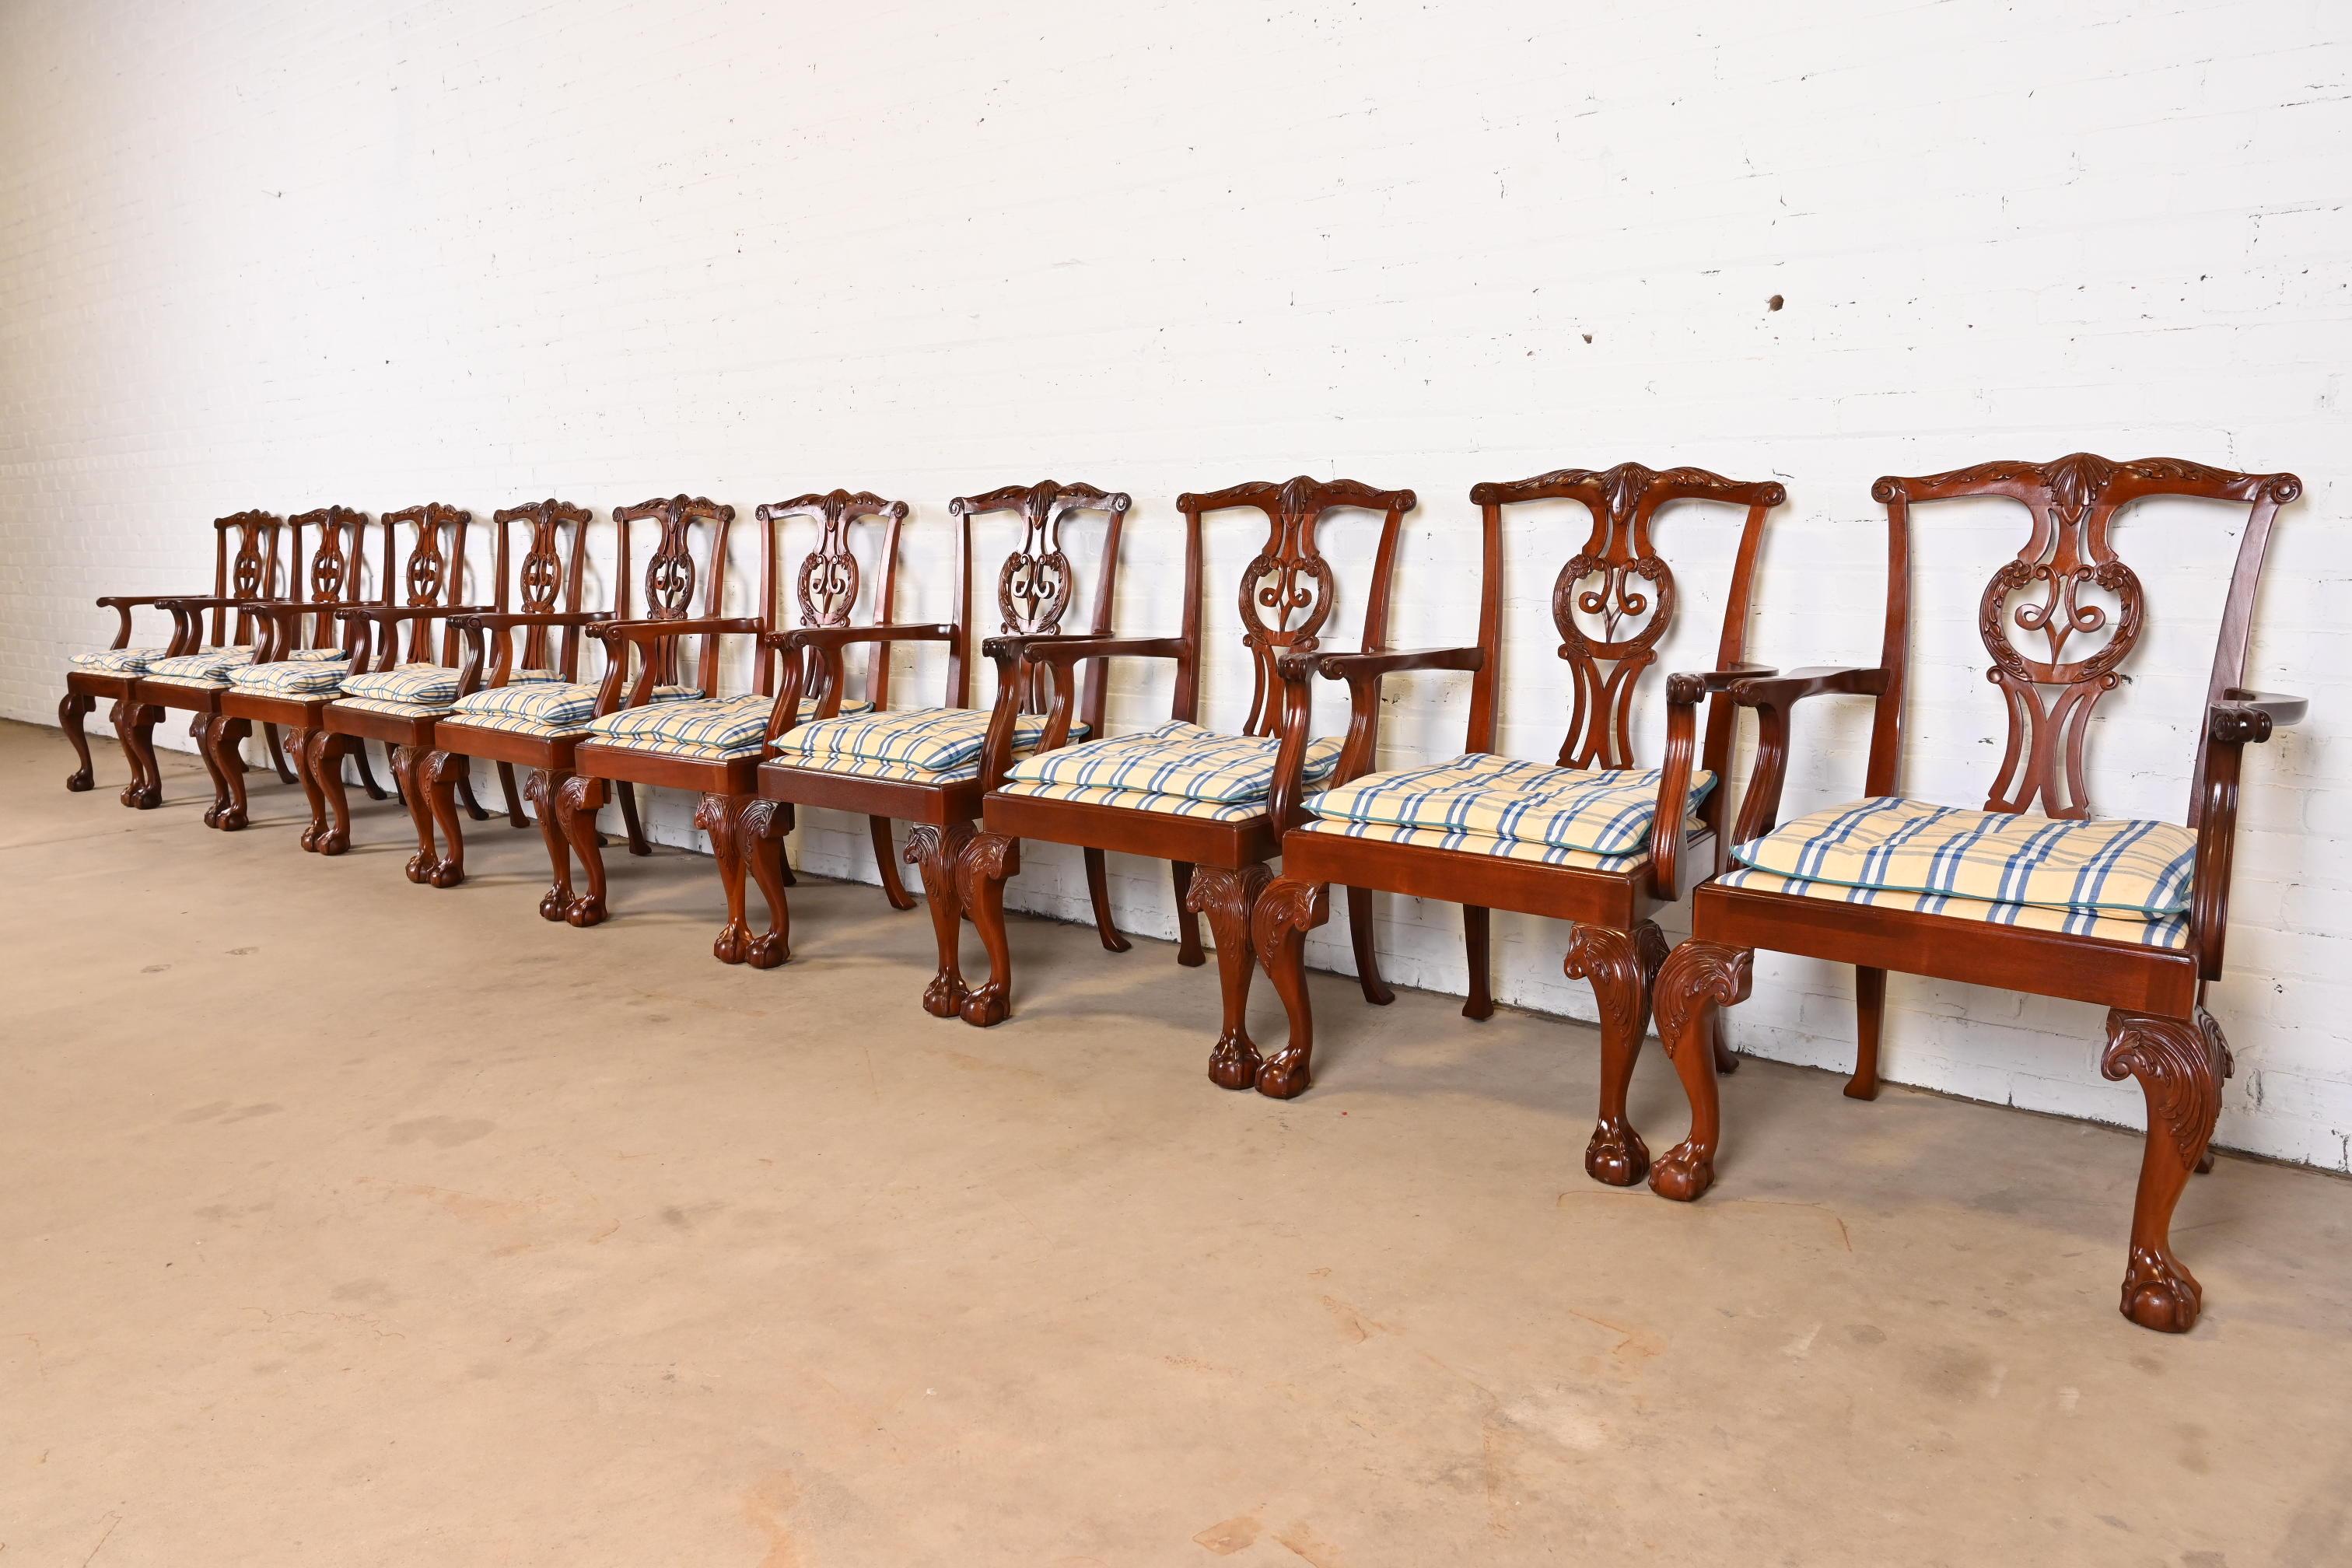 An outstanding set of ten Chippendale or Georgian style dining armchairs

By Baker Furniture

USA, circa 1980s

Carved solid mahogany frames, with cabriole legs and ball and claw feet, and Ralph Lauren style plaid upholstery.

Measures: 25.75